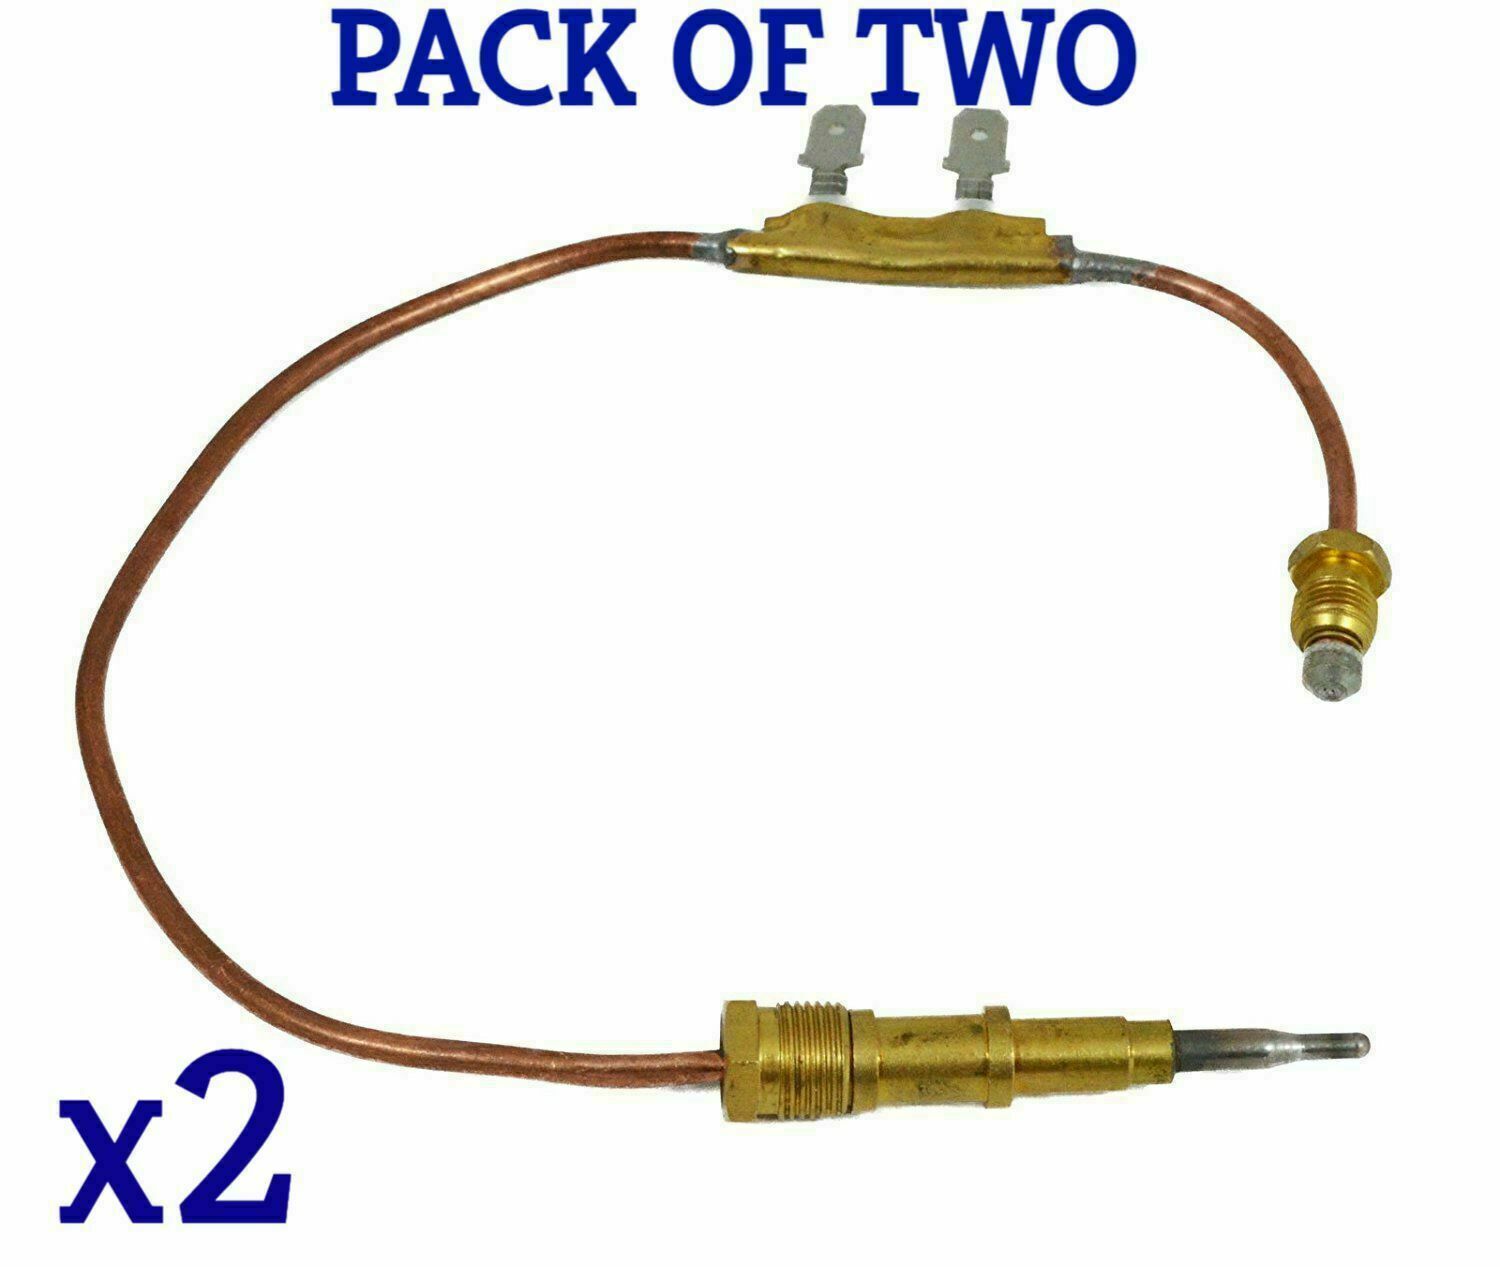 PACK OF TWO Thermocouple replacement for Desa LP Heater 113884-01 - $19.79